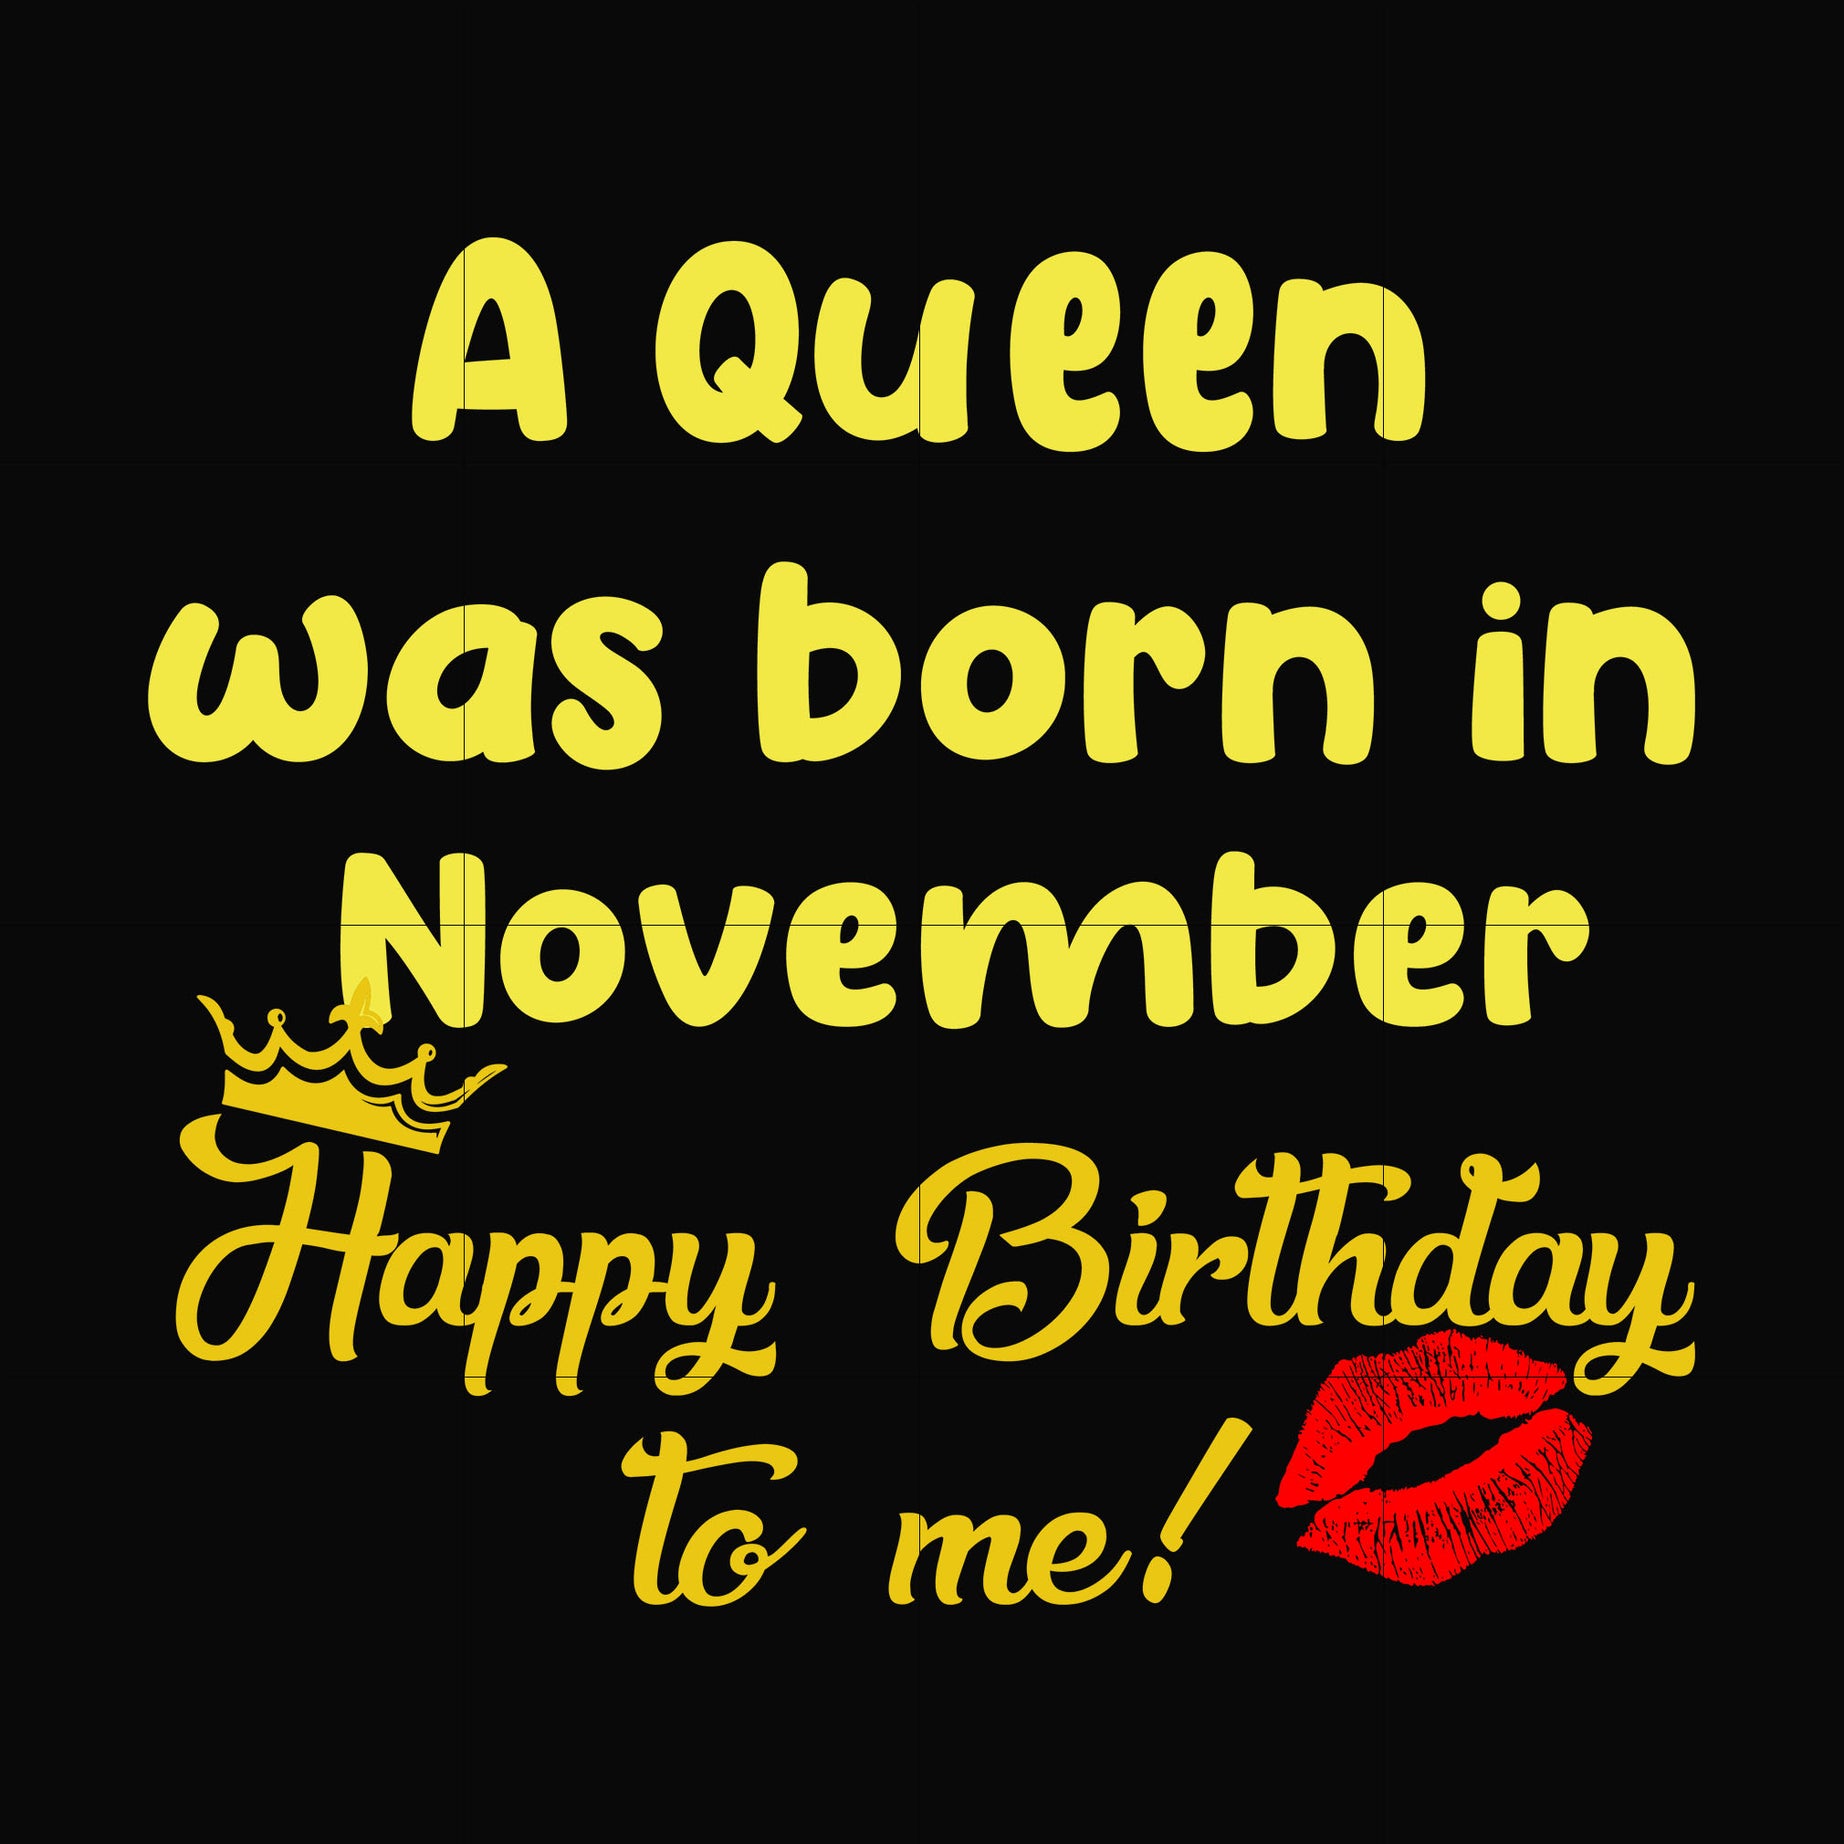 A queen was born in November happy birthday to me svg, png, dxf, eps digital file BD0071